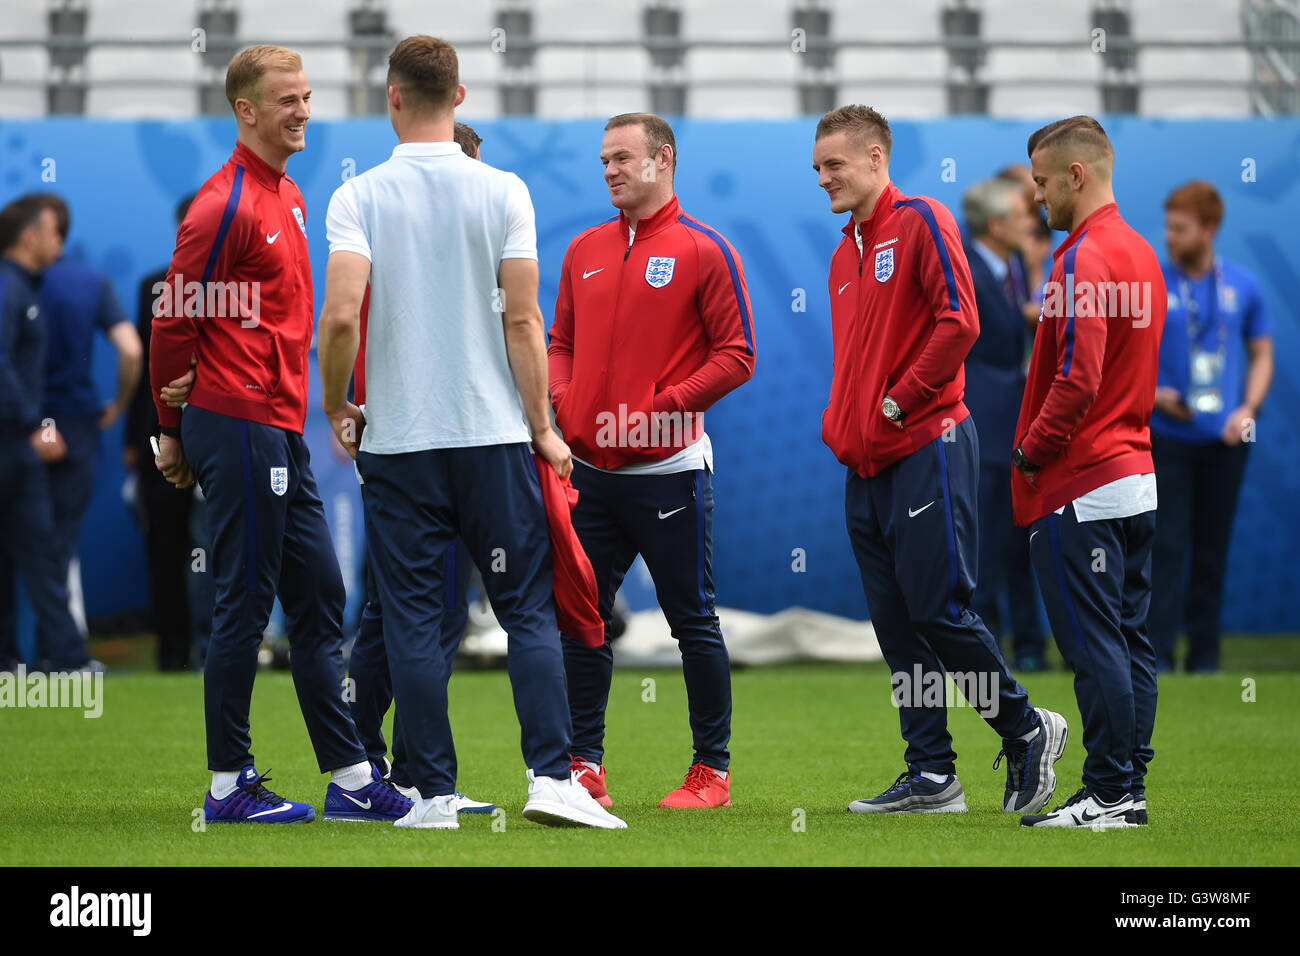 England's (left to right) Joe Hart, Gary Cahill, Wayne Rooney, Jamie Vardy and Jack Wilshere during the walk around at the Stade Felix Bollaert-Delelis, Lens. Stock Photo